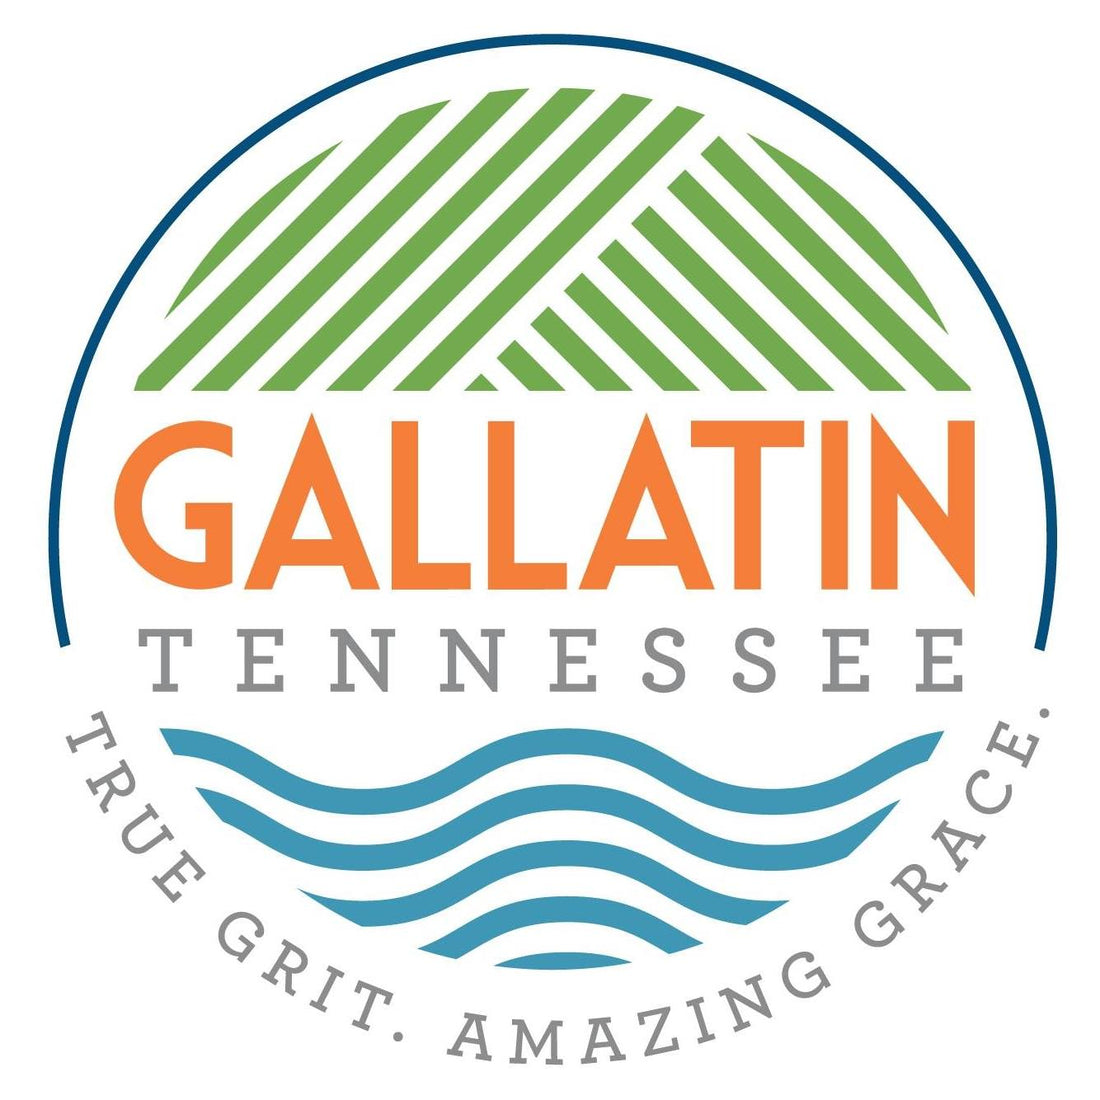 Proudly "Made in Gallatin:" Our Soap Features in Gallatin's Latest Gift Boxes